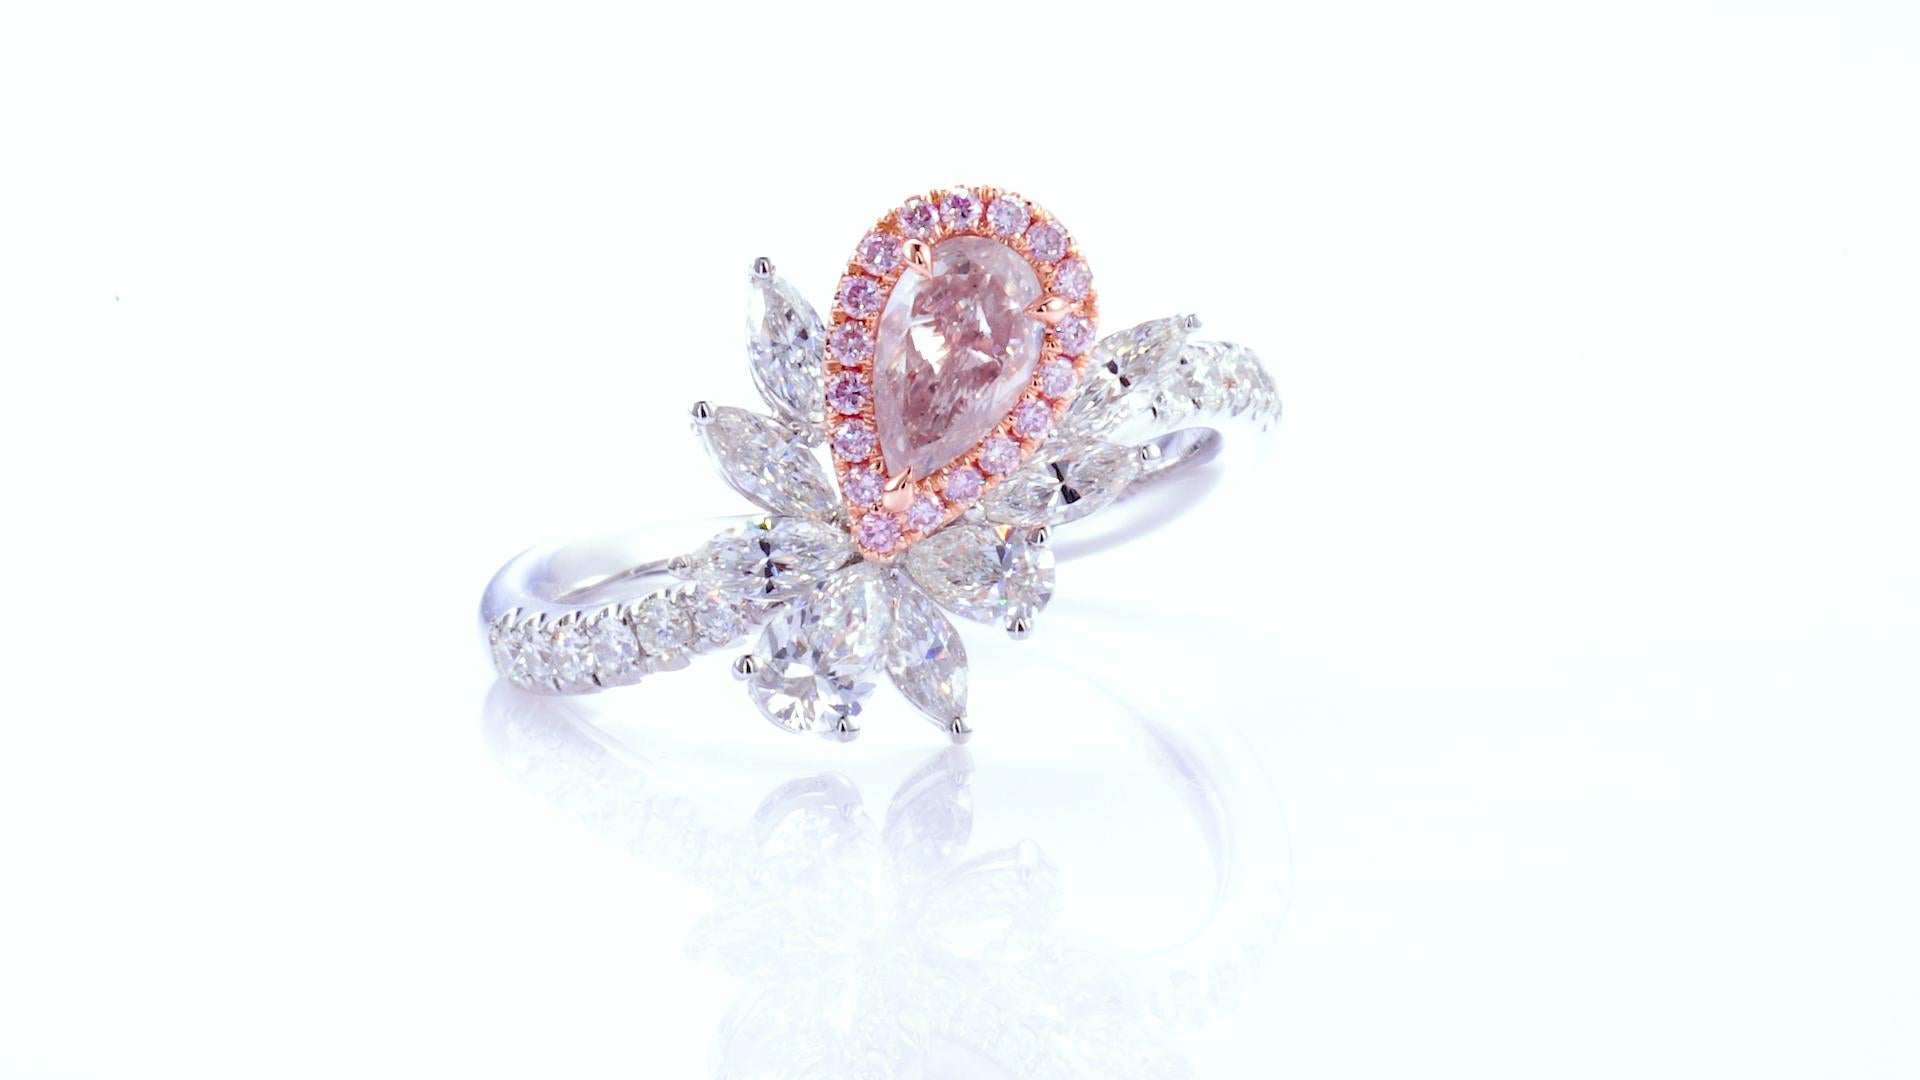 0.40ct Pear shaped natural fancy light pink GIA Certified diamond mounted on 18kt gold with small natural pink and white diamonds. 

A stunning and elegant piece, this fancy light pink pear-studded diamond ring is a true masterpiece. Crafted from